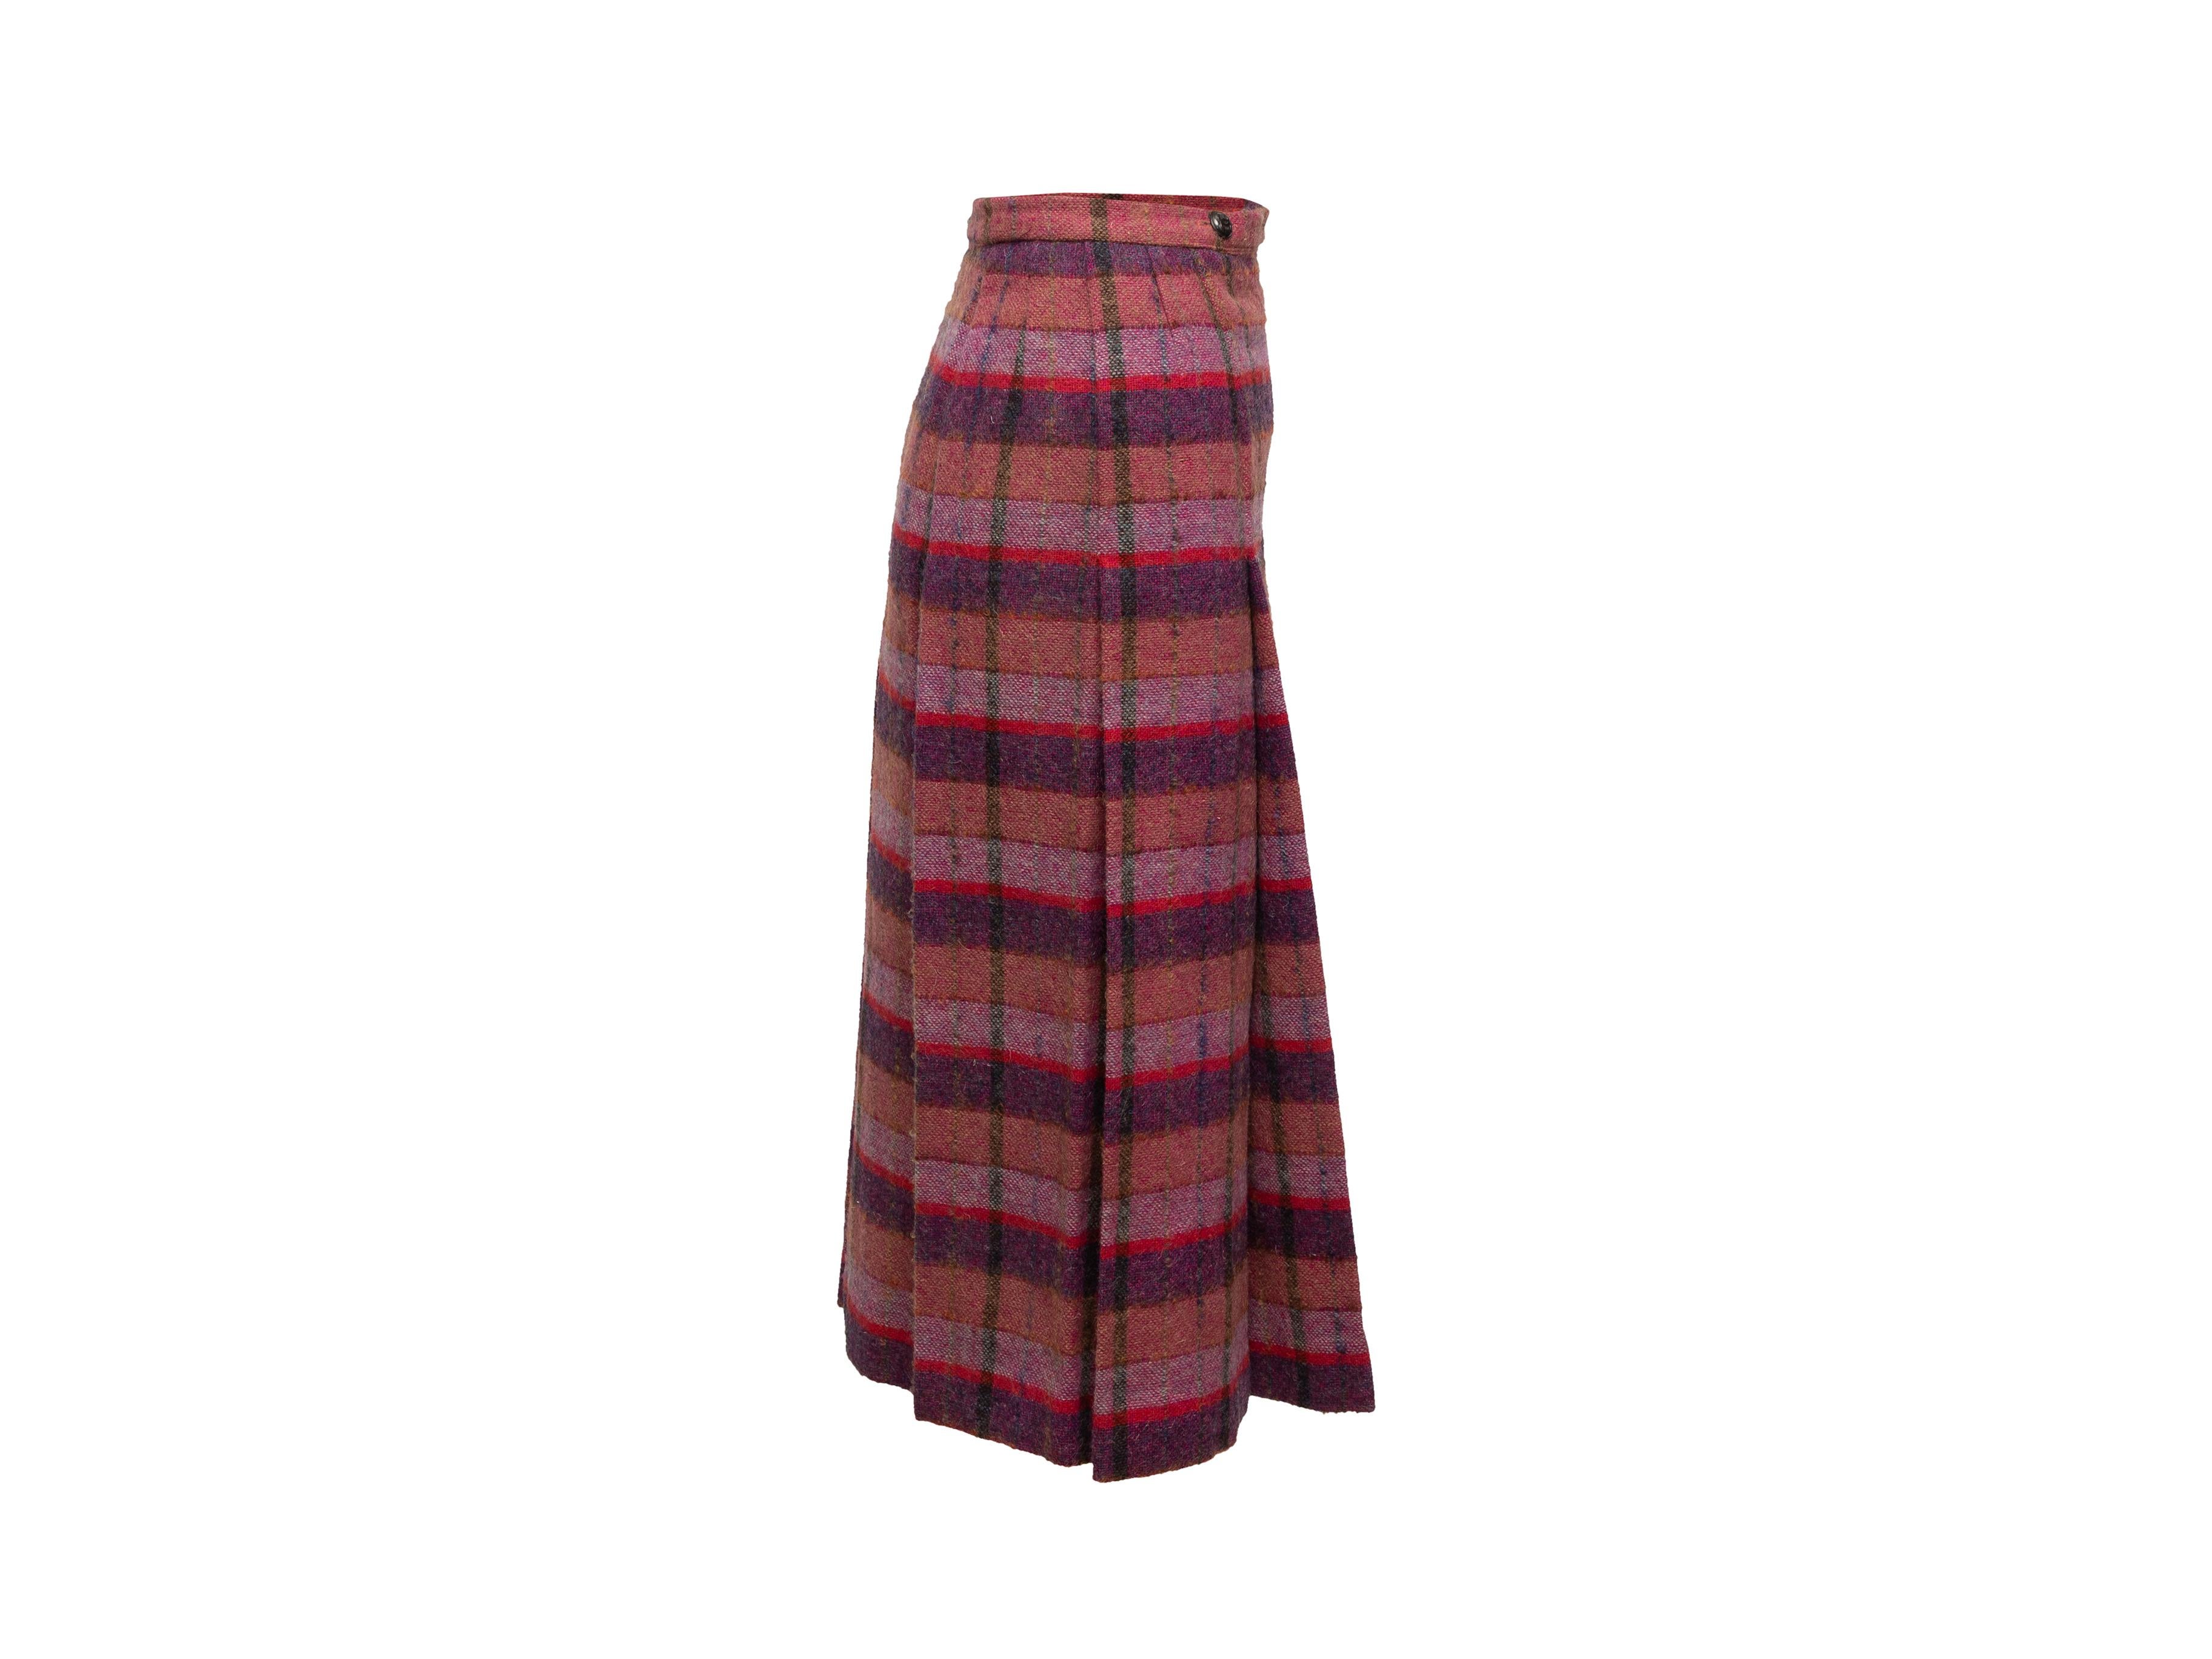 Product details: Vintage pink and purple wool pleated skirt by Chanel. Plaid pattern throughout. Button closures at front. 24